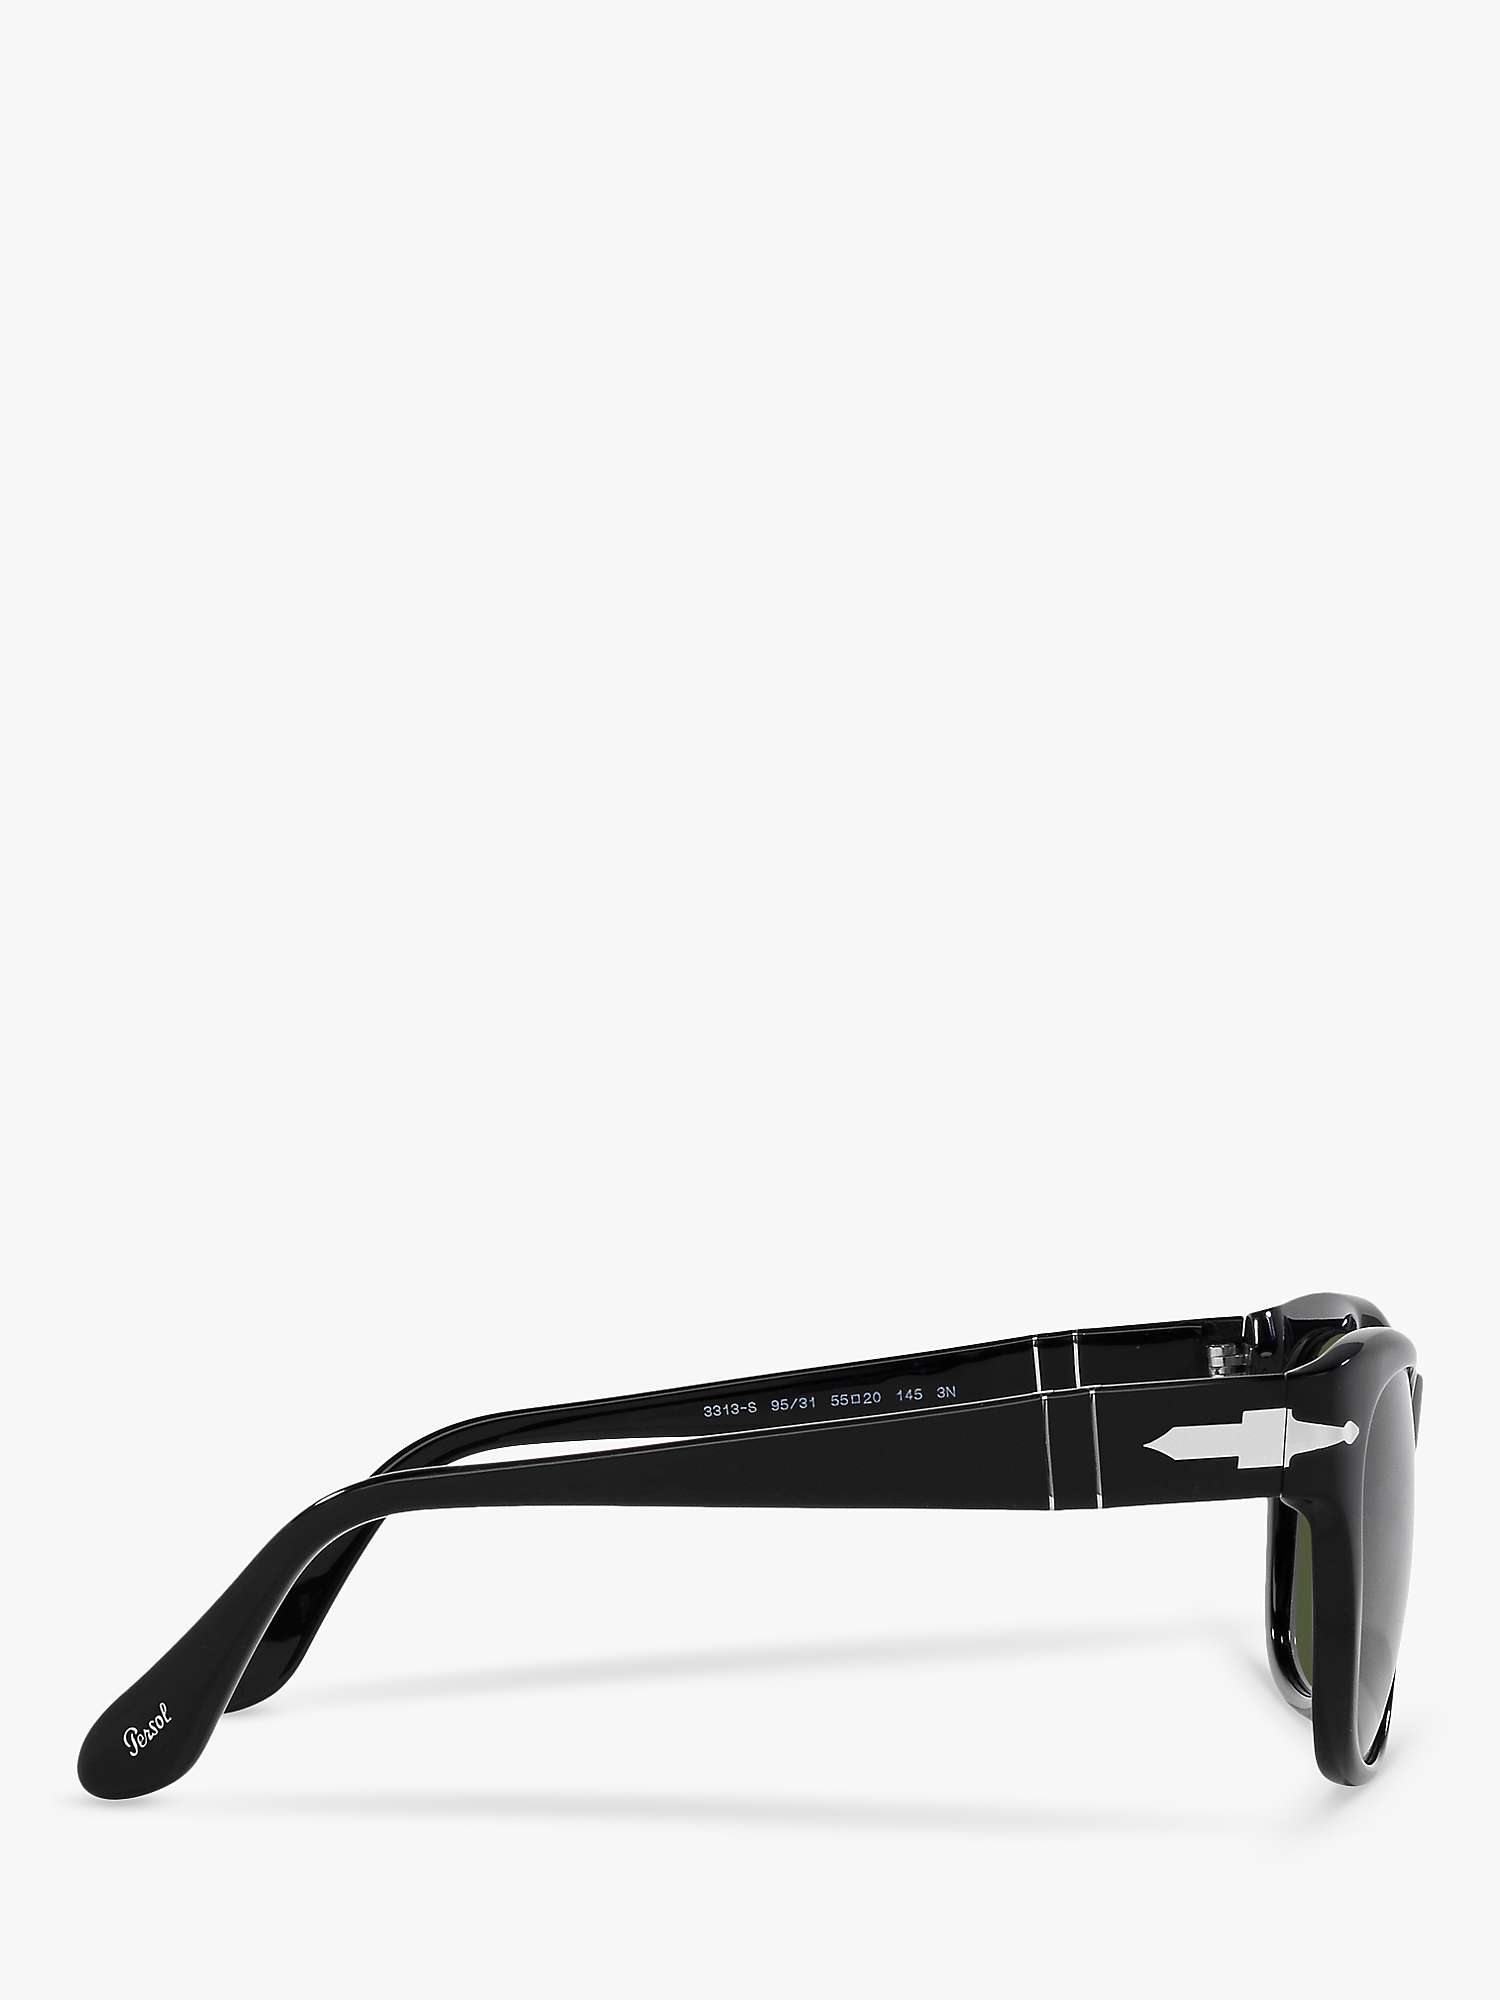 Buy Persol PO3313S Square Sunglasses, Black/Green Online at johnlewis.com